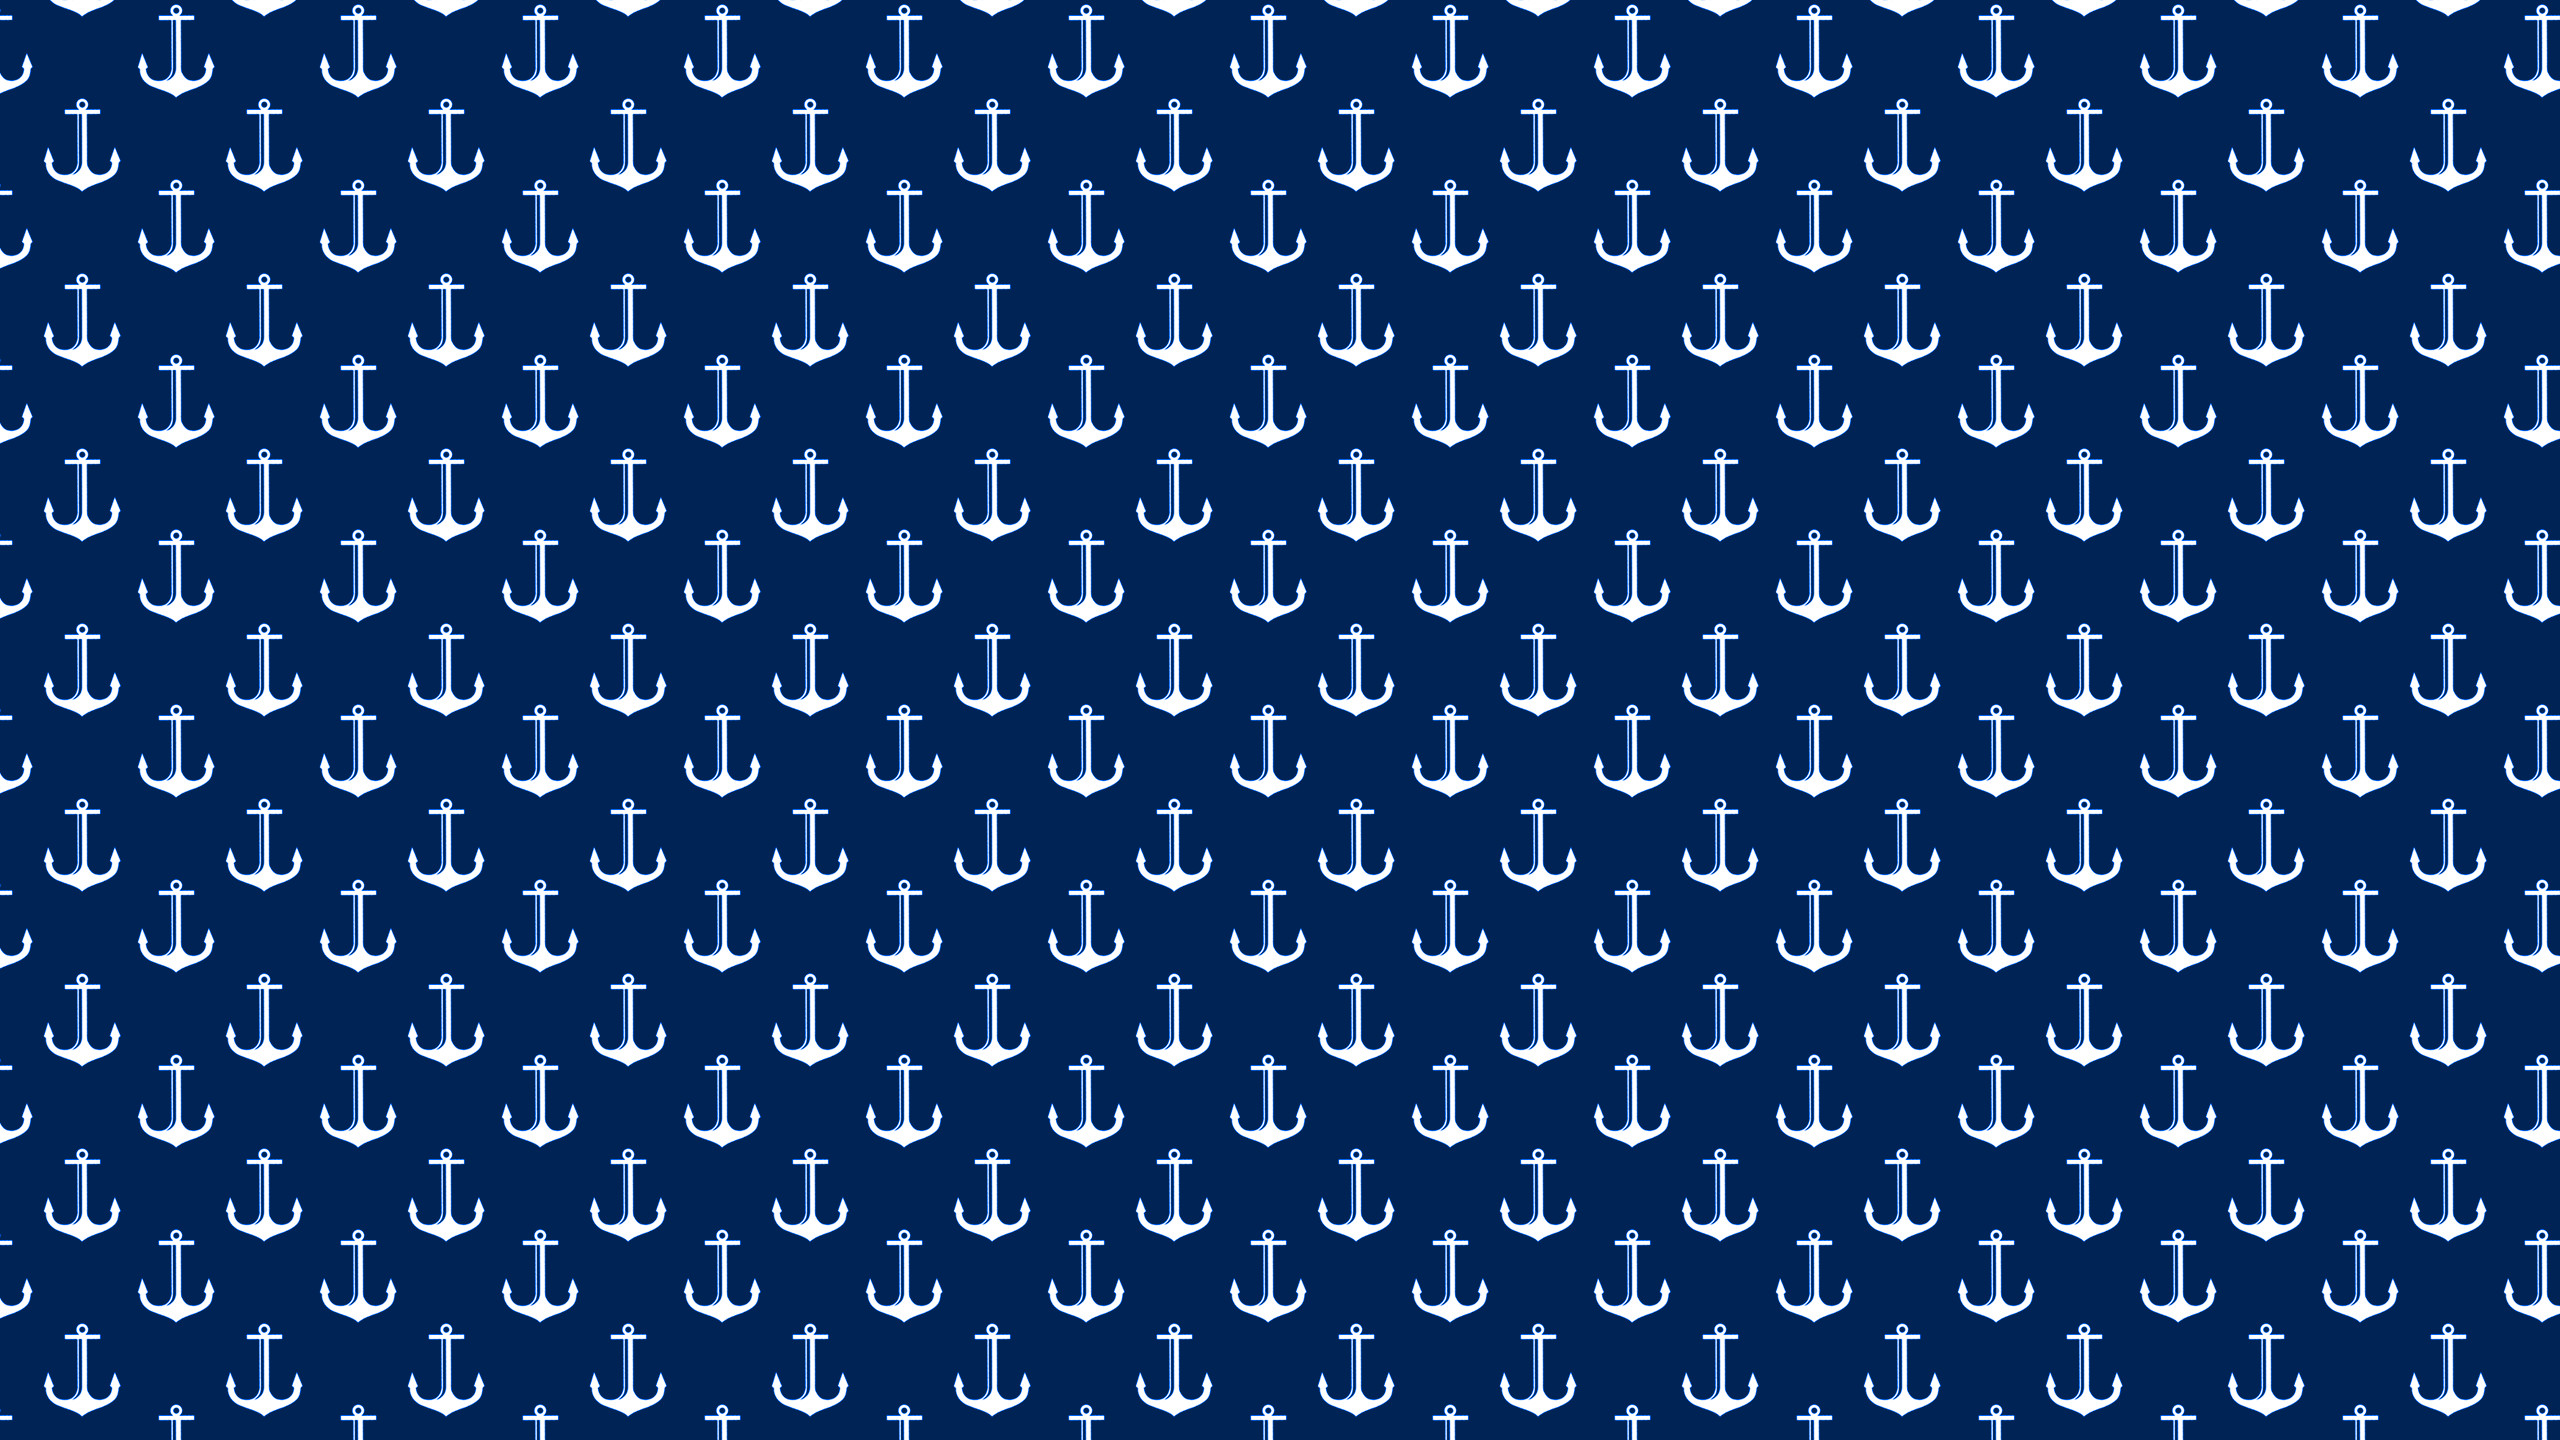 Navy Blue Anchors Desktop Wallpaper is easy. Just save the wallpaper .